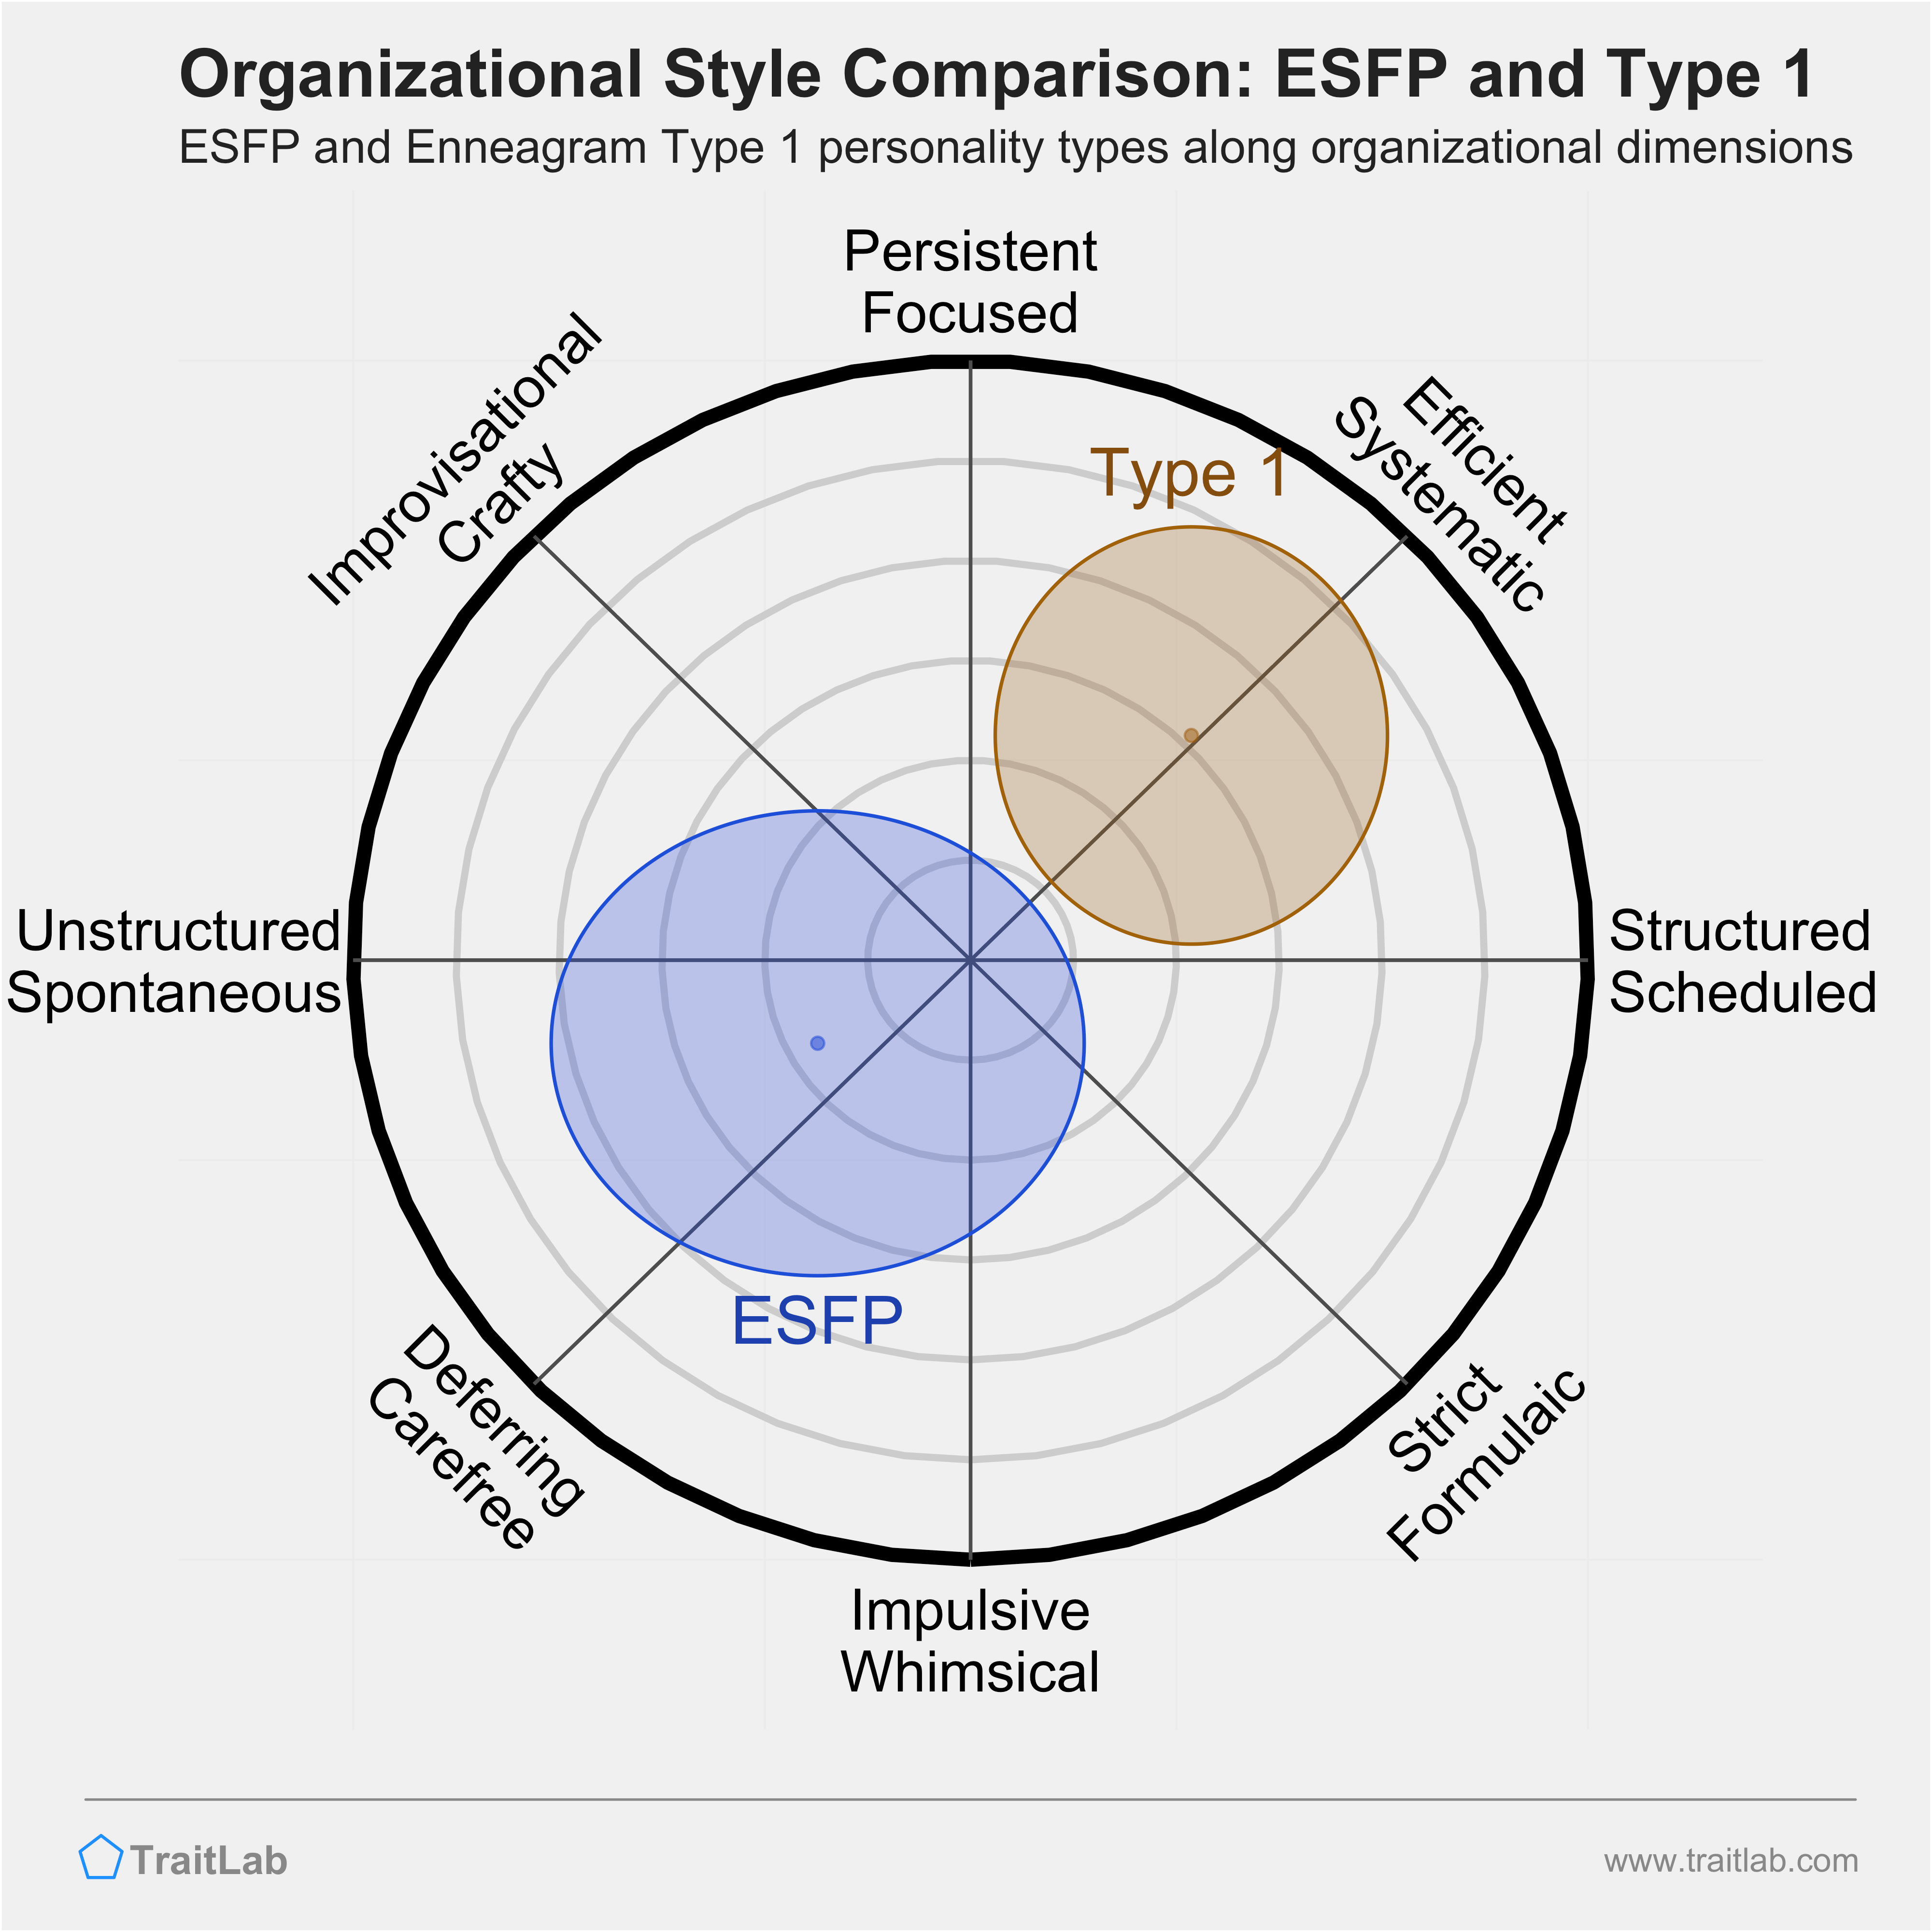 ESFP and Type 1 comparison across organizational dimensions